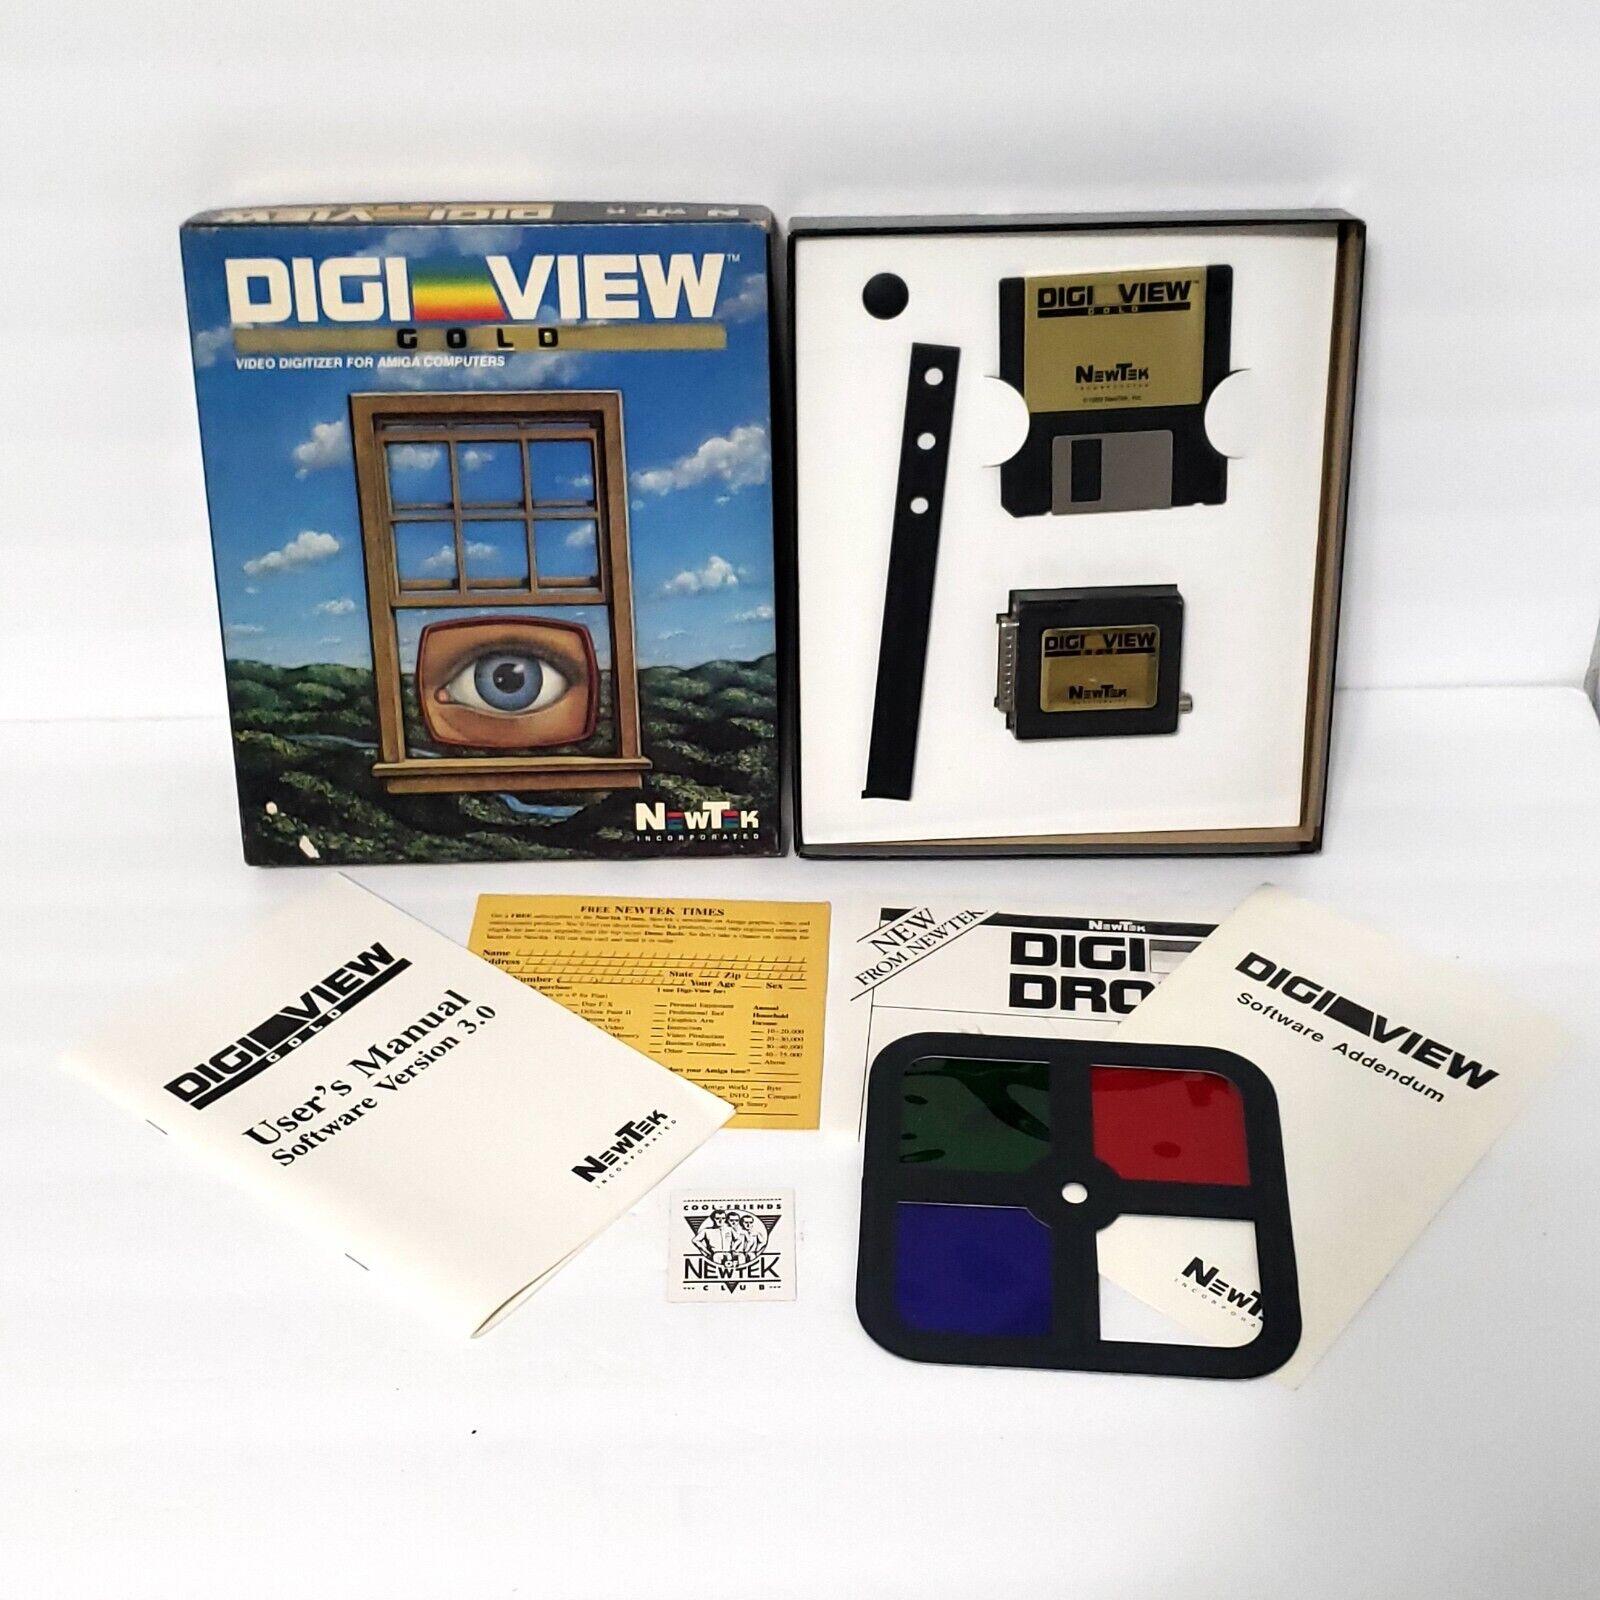 Digi View Gold NewTek Color Digitizer 3.0 for Commodore Amiga w/ Software AS IS